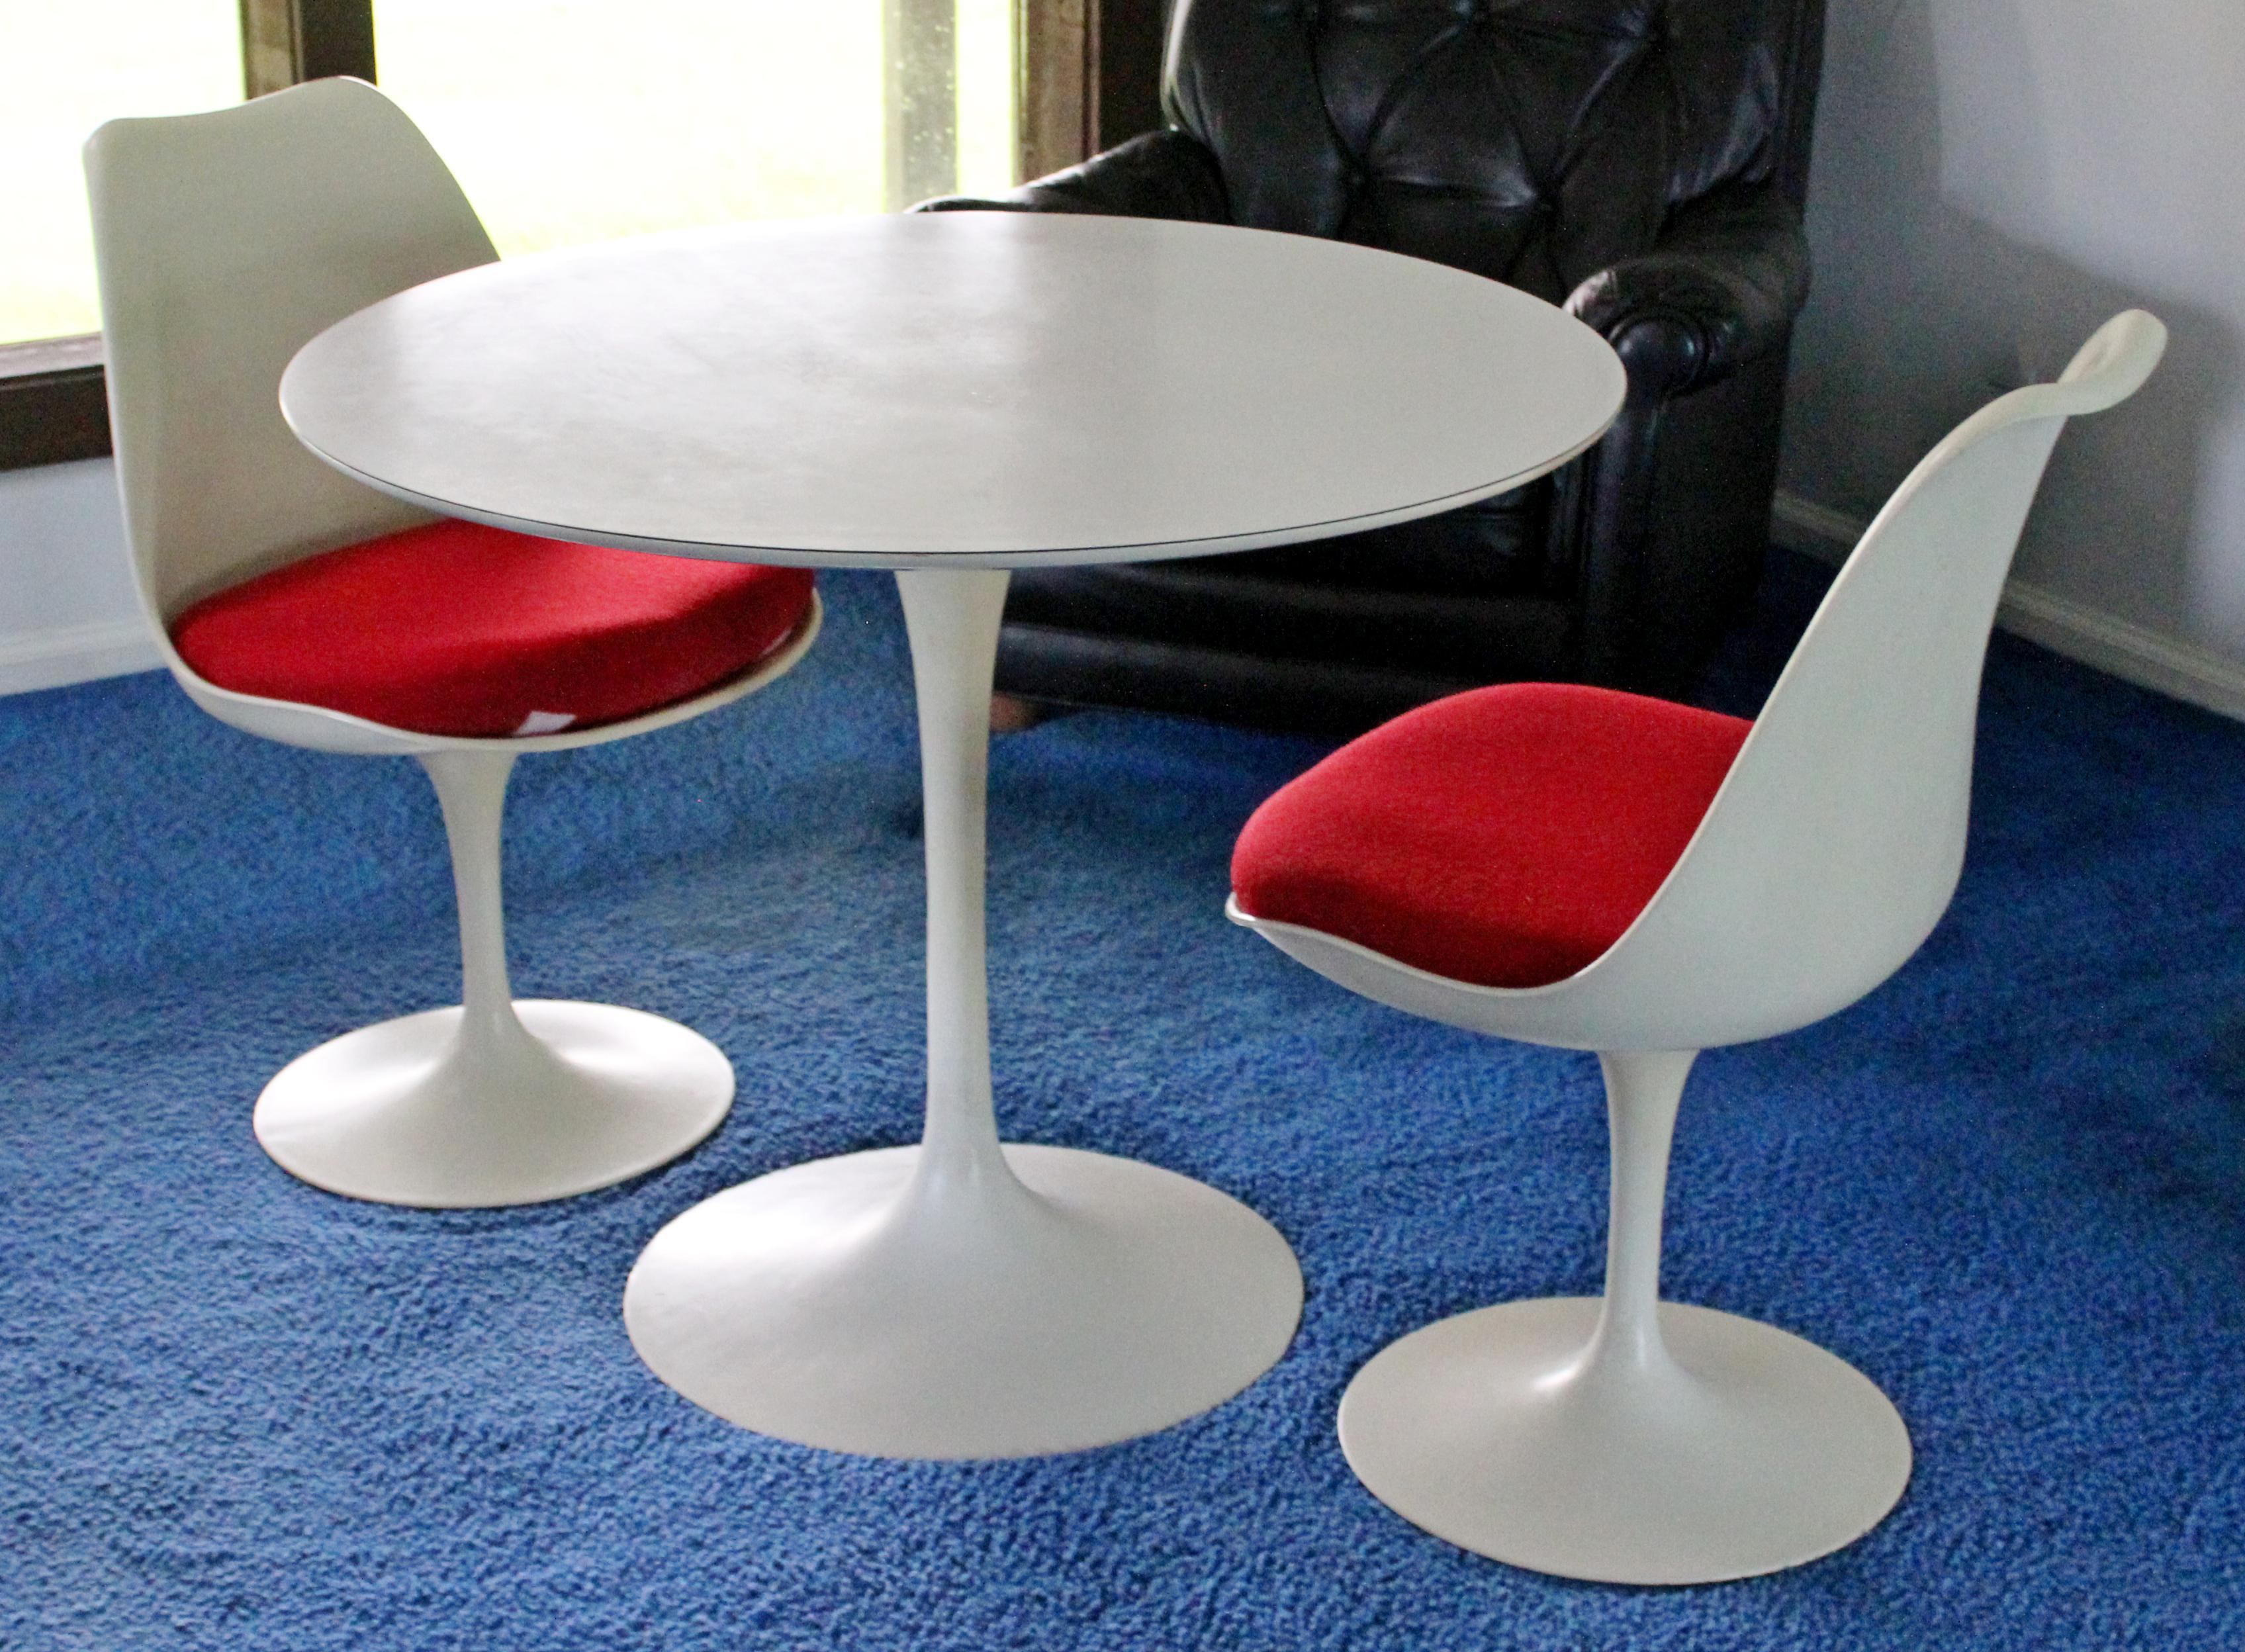 For your consideration is a fantastic, original, Tulip dinette set, including table and pair of chairs, by Eero Saarinen for Knoll, circa the 1960s. In very good vintage condition. The dimensions of the table are 36